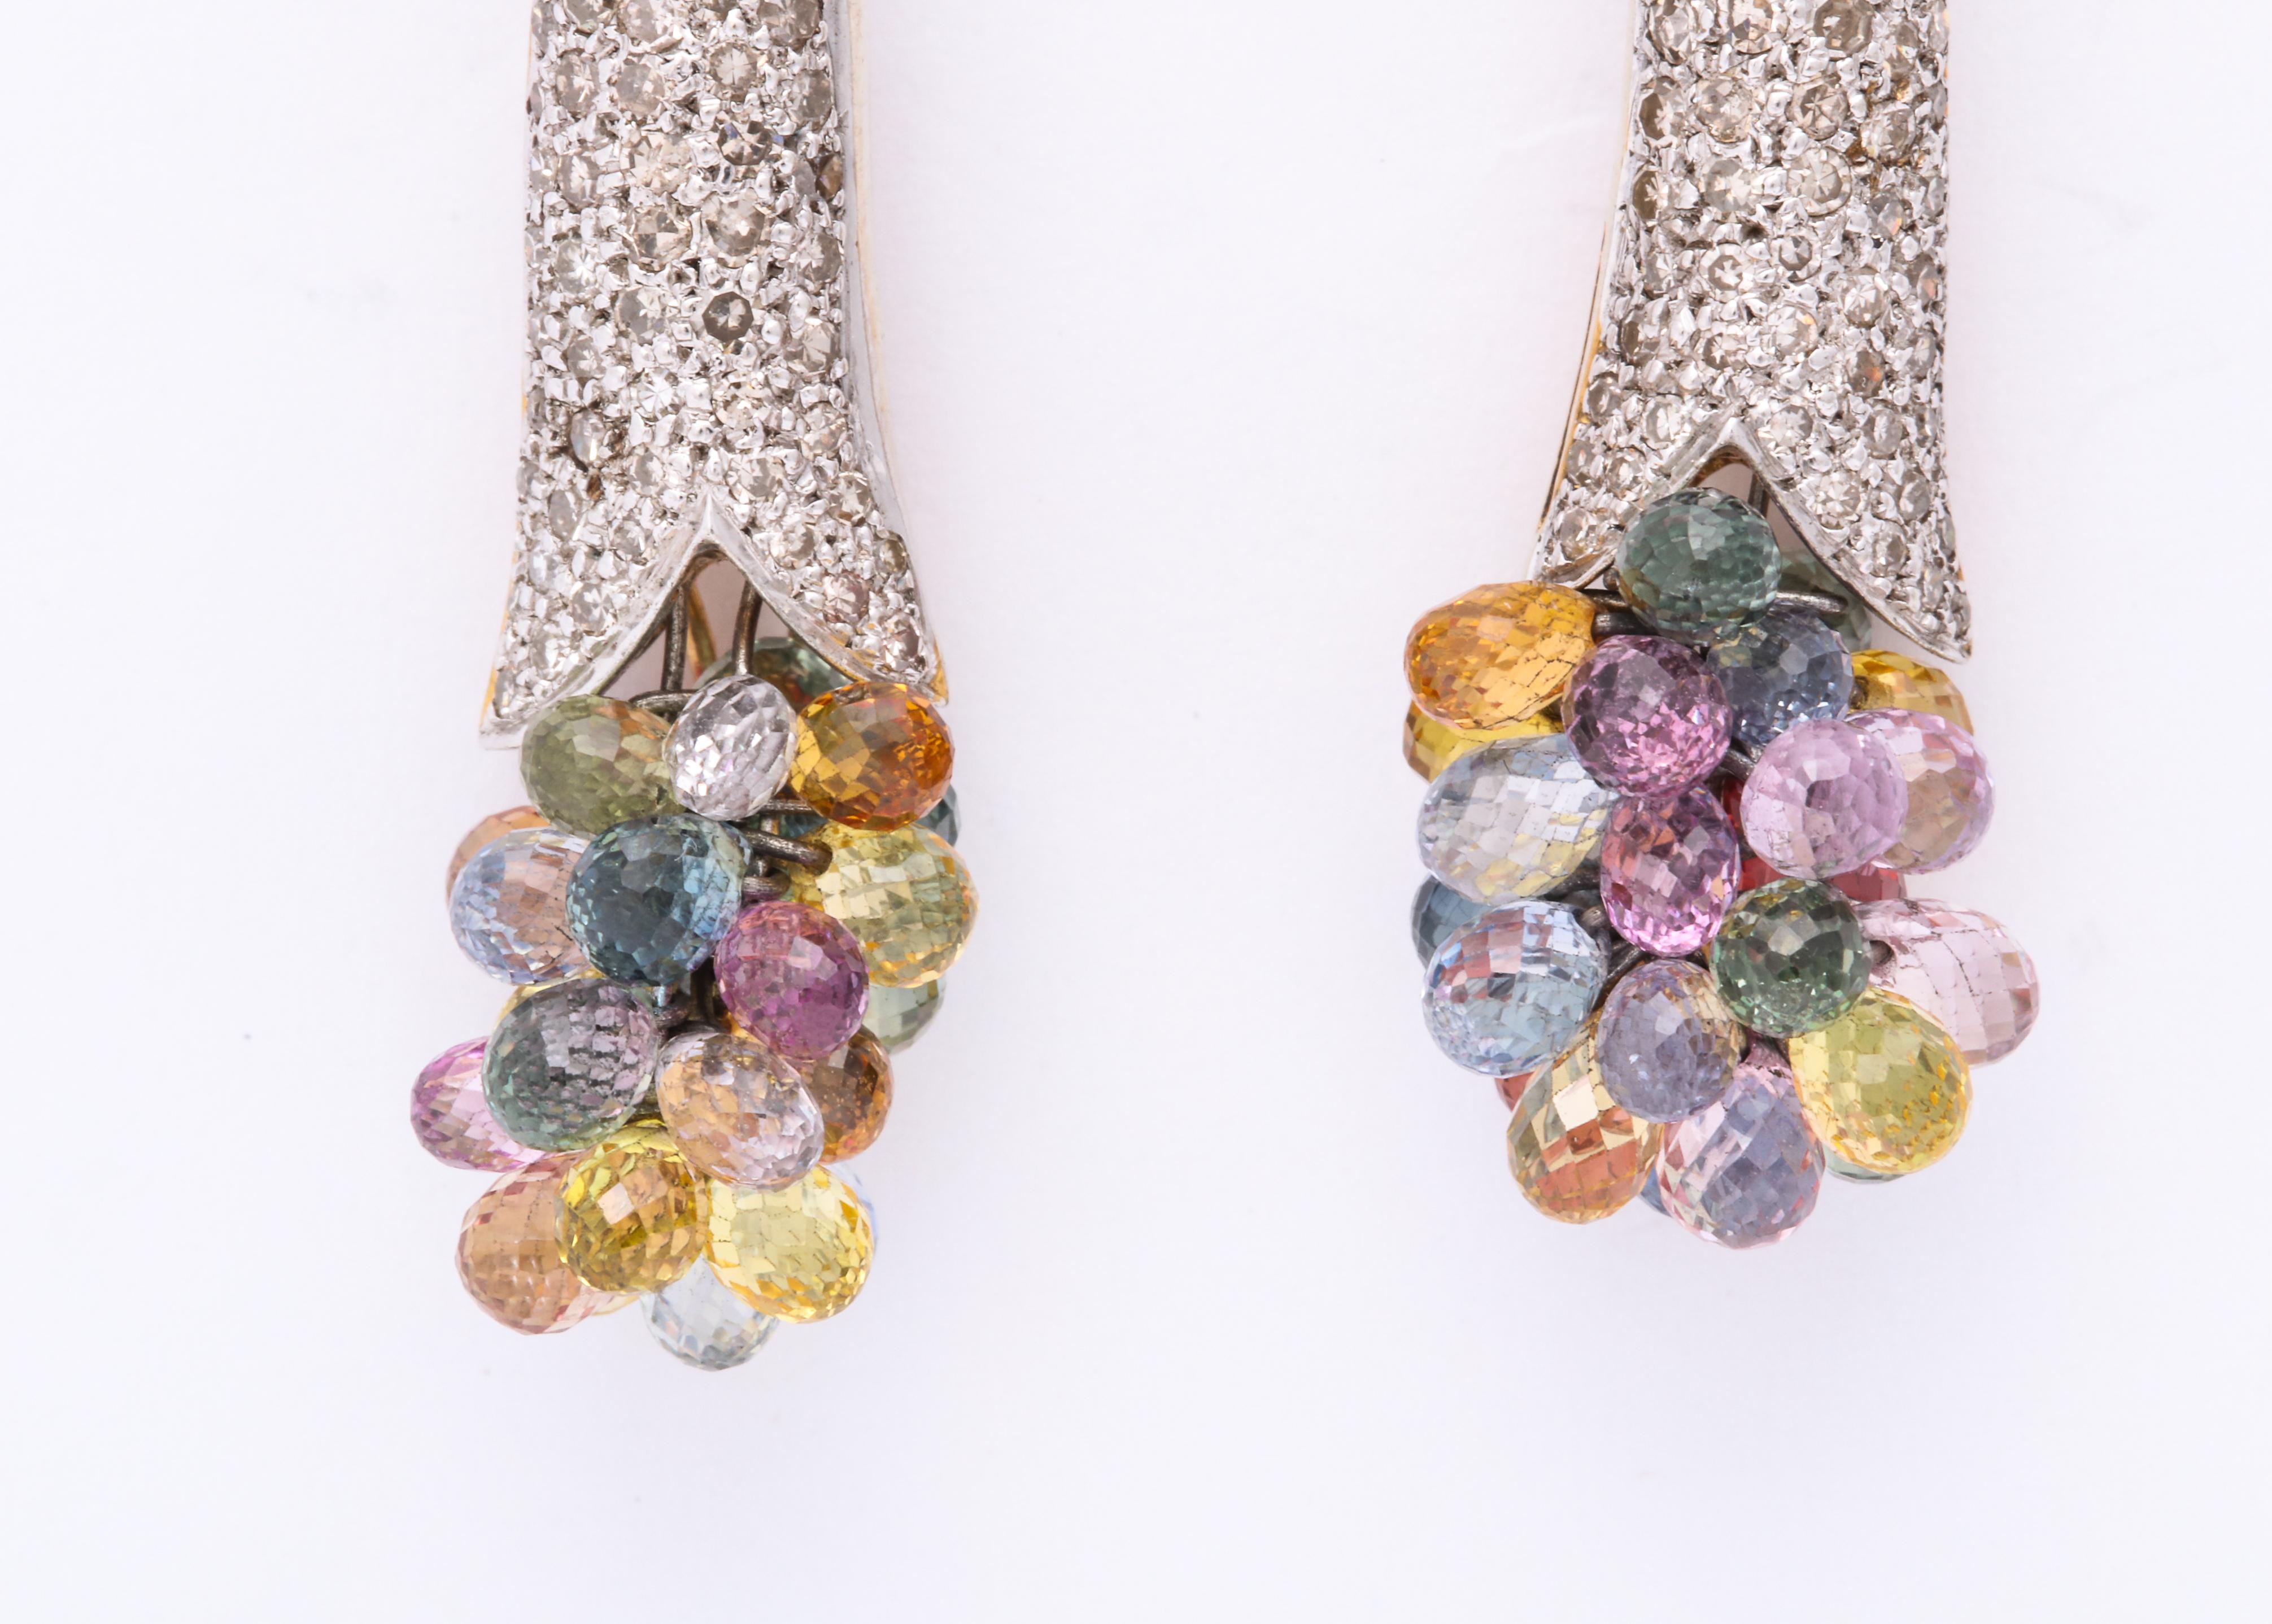 Oval Cut Diamond Earrings with a  Dangling Bouquet of Colored  Gemstones